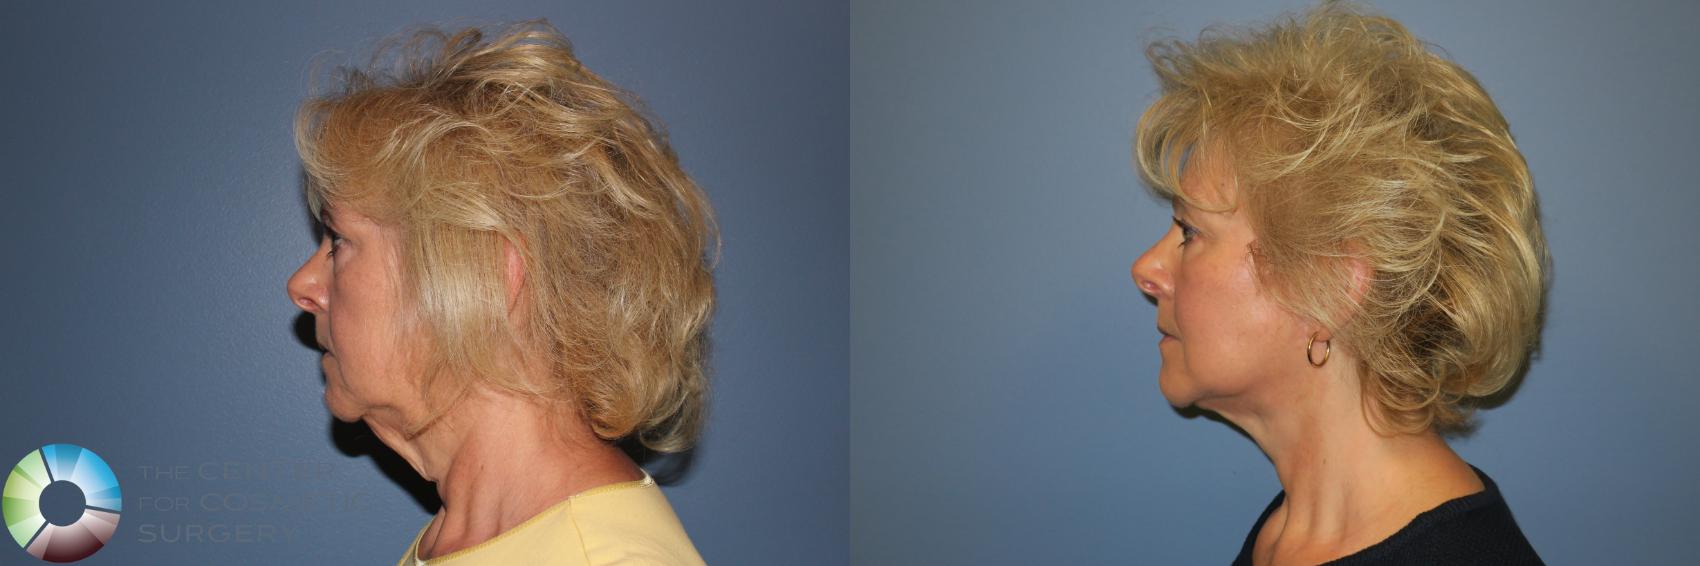 Before & After Mini Facelift Case 11332 Left Side View in Golden, CO